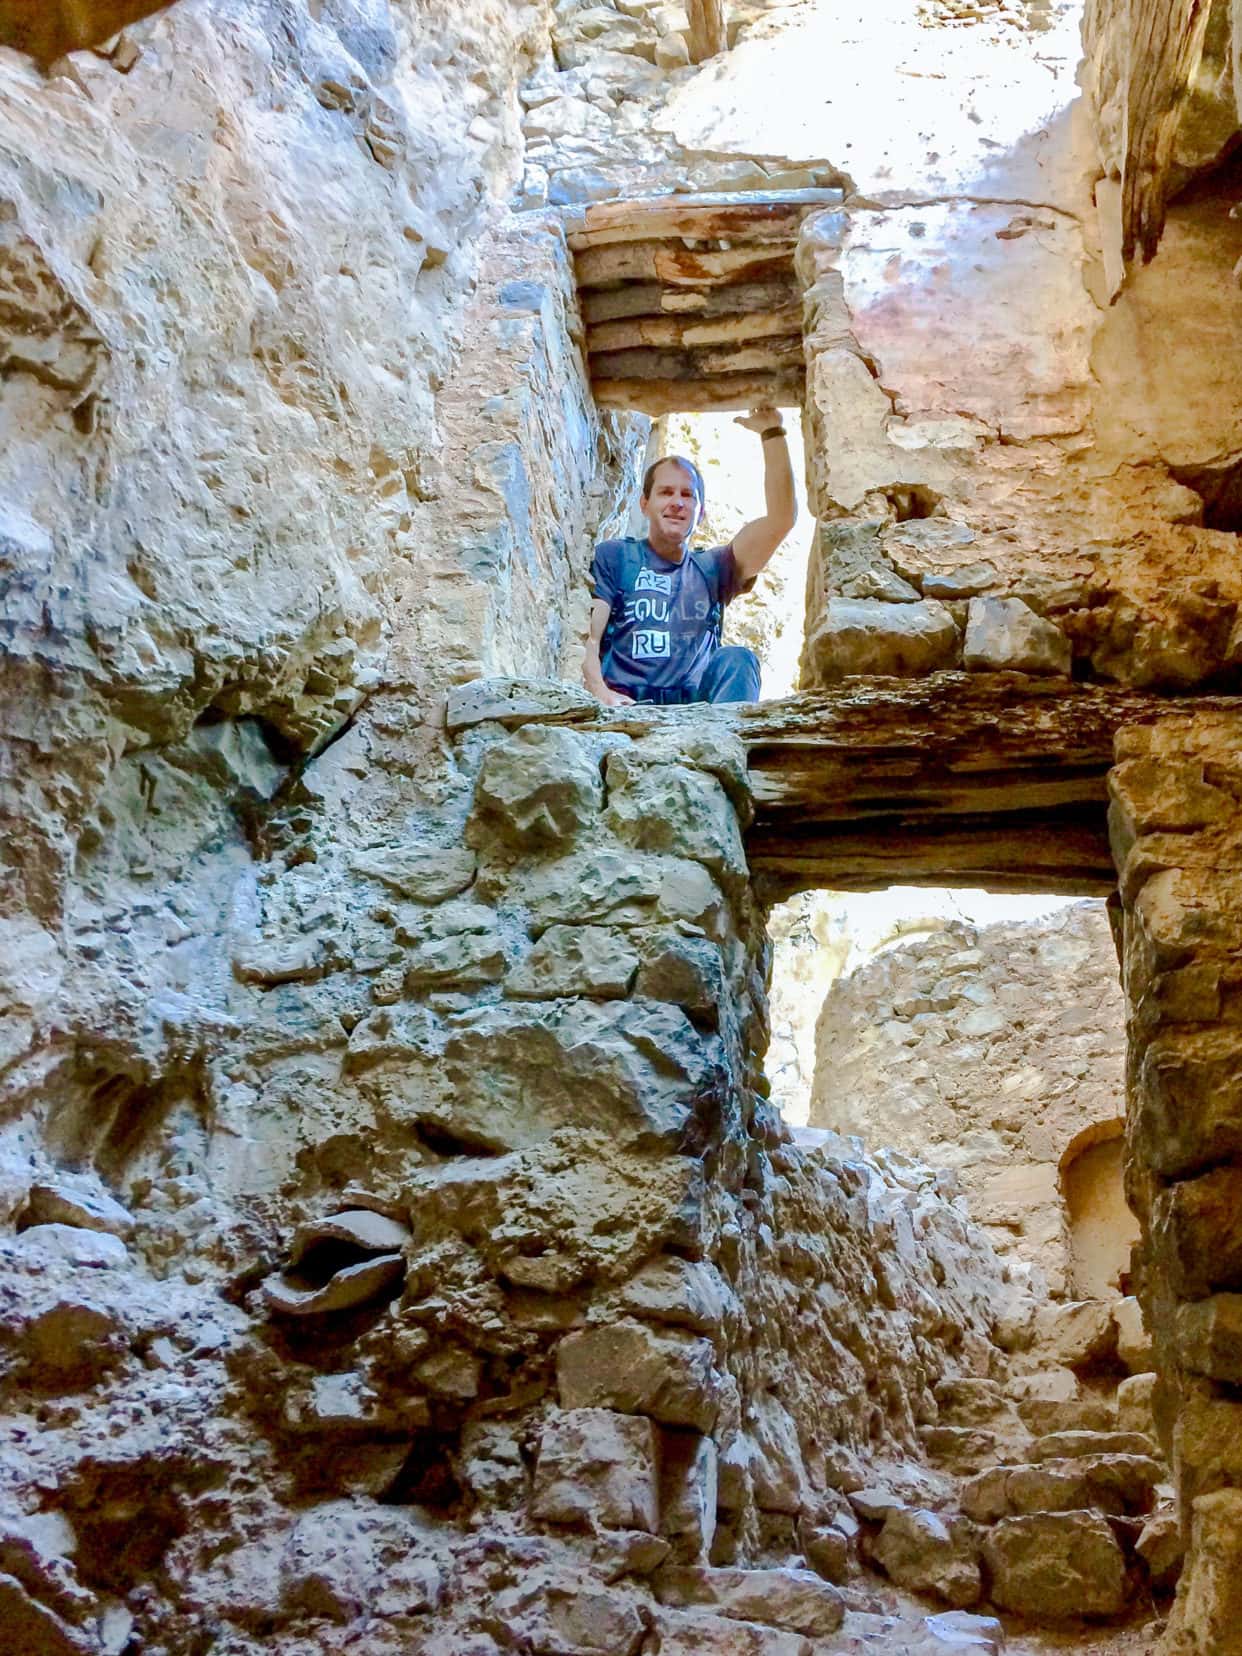 Ancient Philosophou Monastery – tiny doorways and rooms built into the cliff face